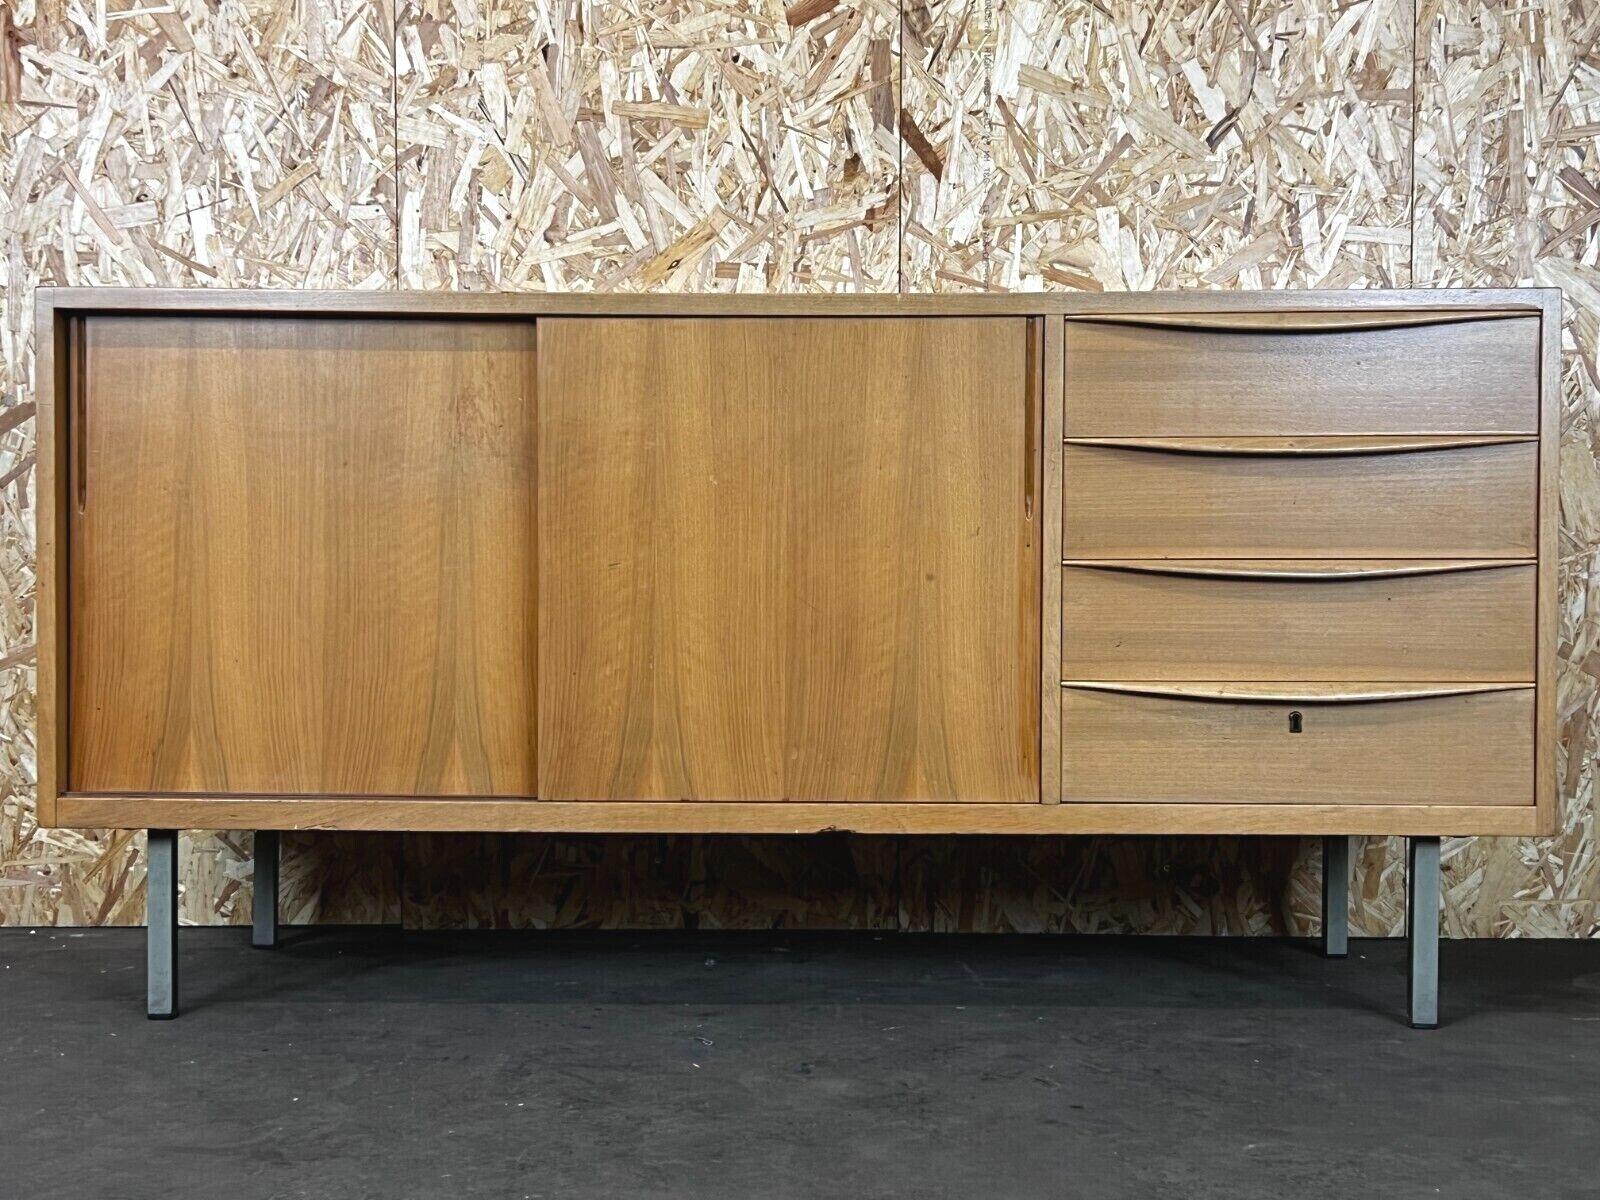 60s 70s sideboard Credenza cabinet Danish Modern Design Denmark 70s

Object: sideboard

Manufacturer:

Condition: good - vintage

Age: around 1960-1970

Dimensions:

150cm x 50cm x 74cm

Other notes:

The pictures serve as part of